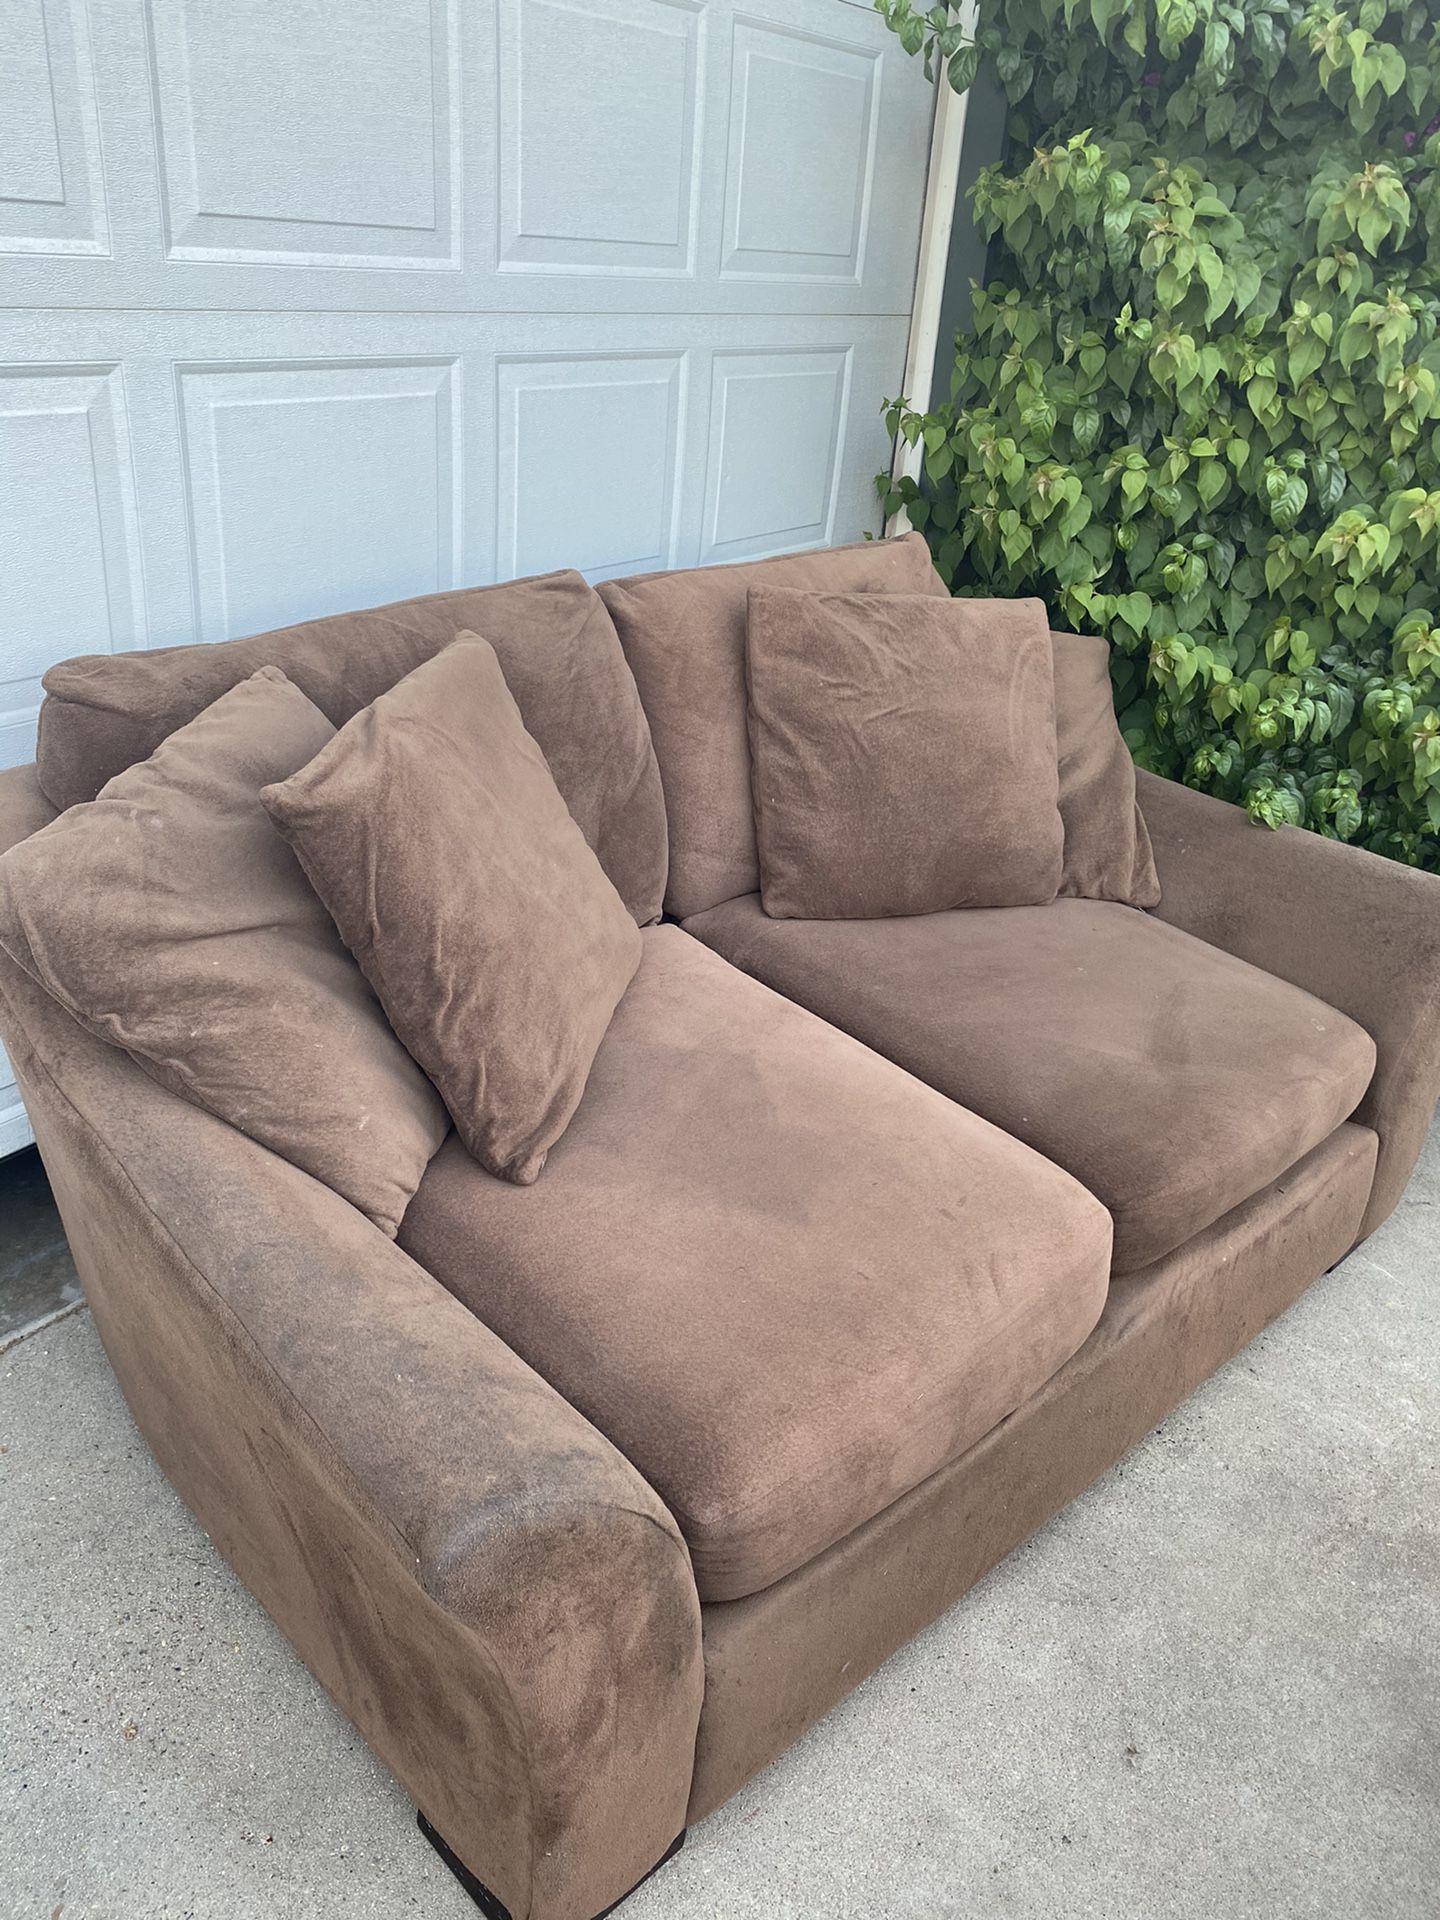 Free big comfy couch (needs cleaning)